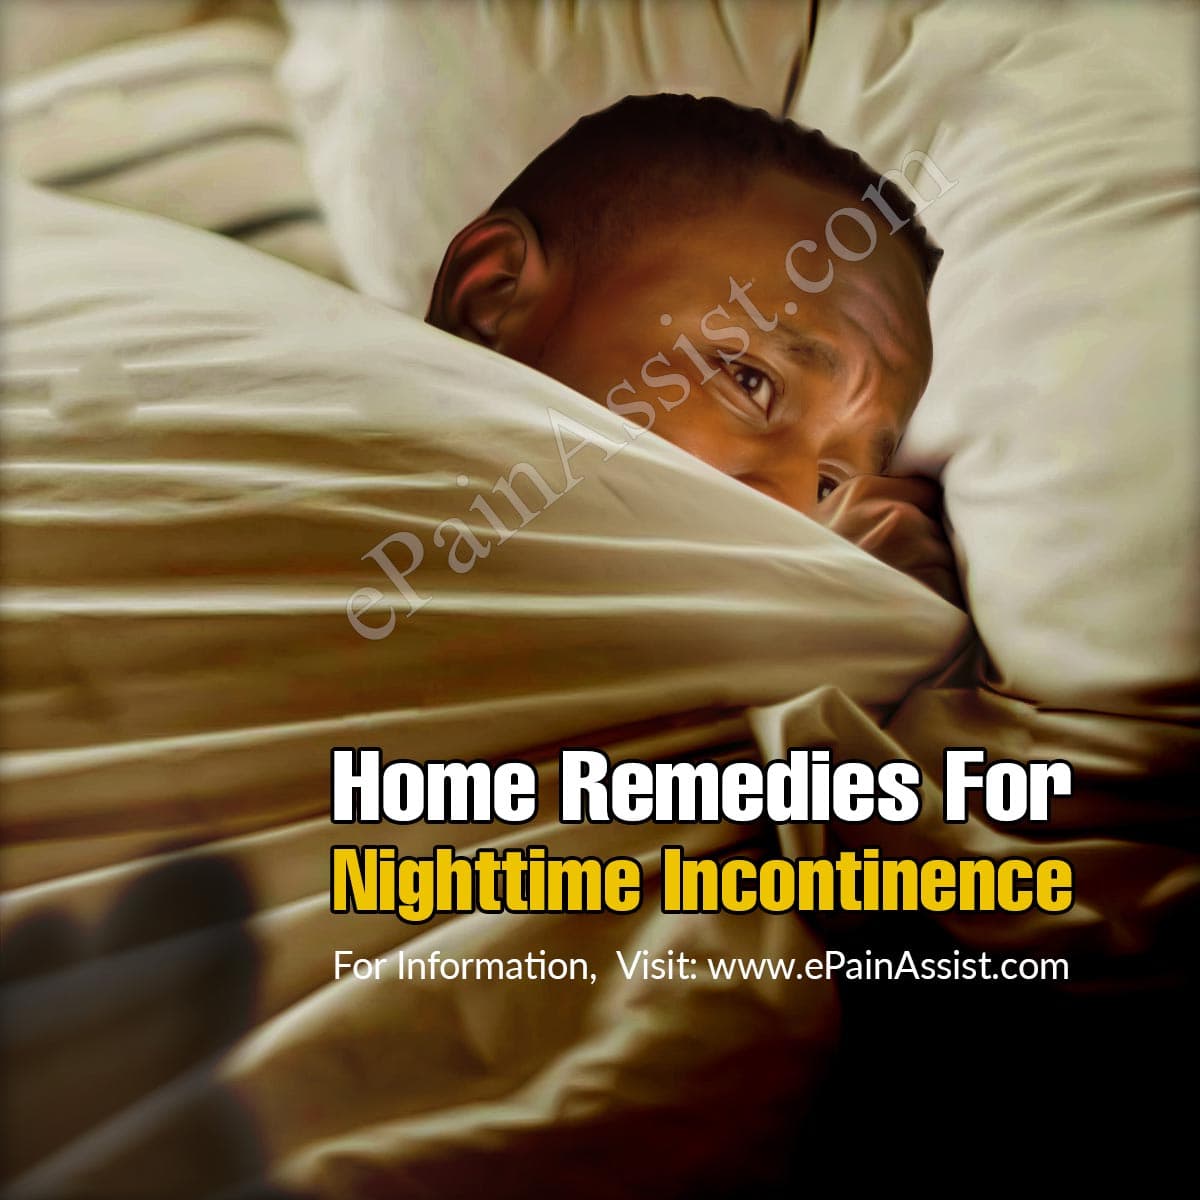 Home Remedies For Nighttime Incontinence